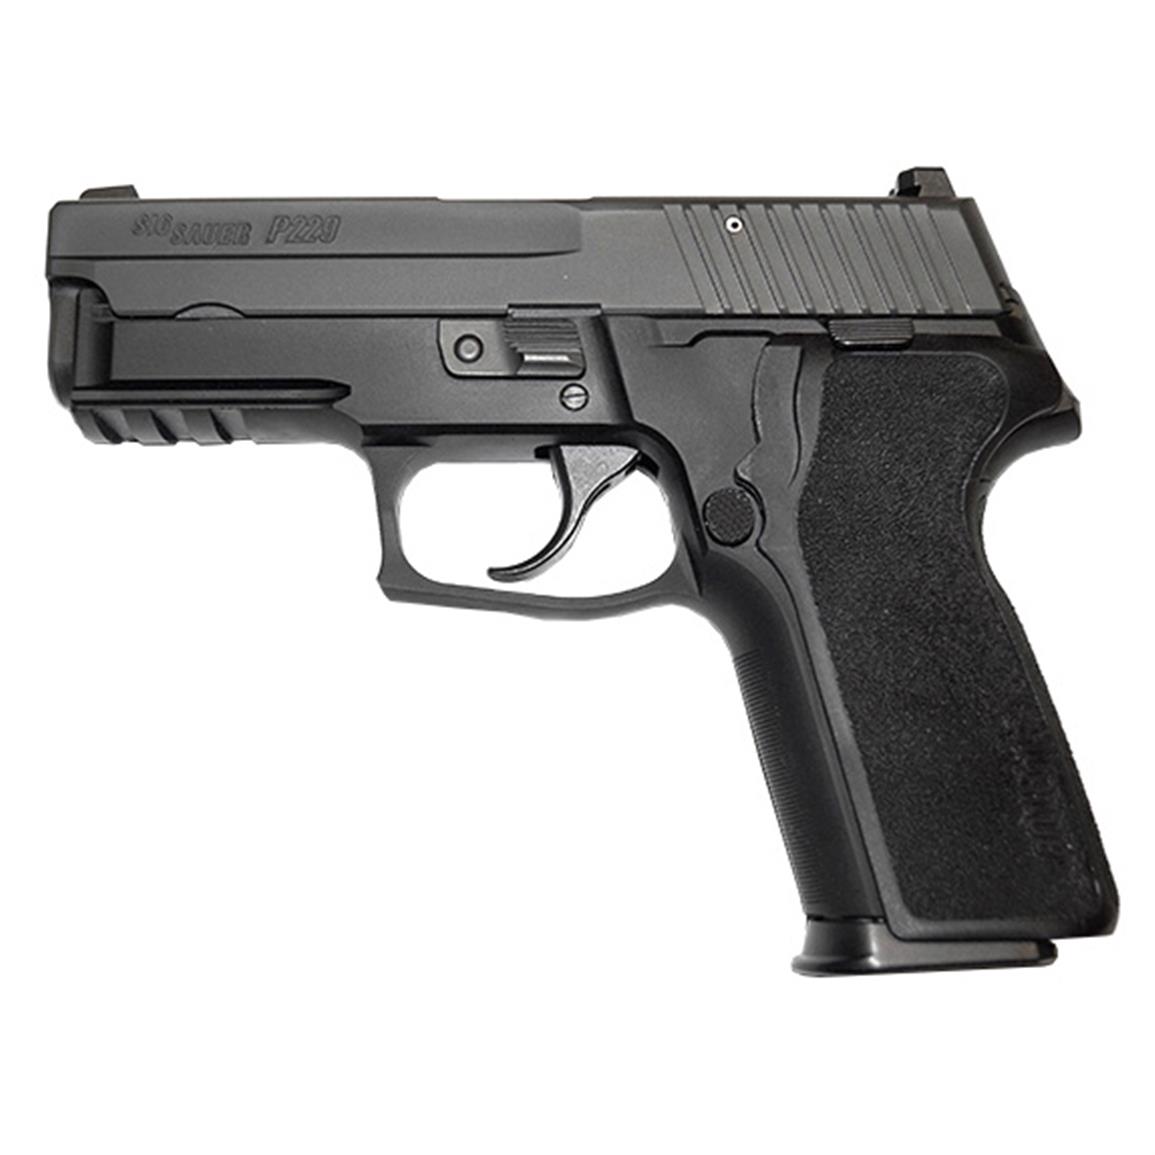 Sig Sauer P229, Semi-Automatic, .40 Smith & Wesson, 3.9" Barrel, 10+1 Rounds, Used Police Trade-In